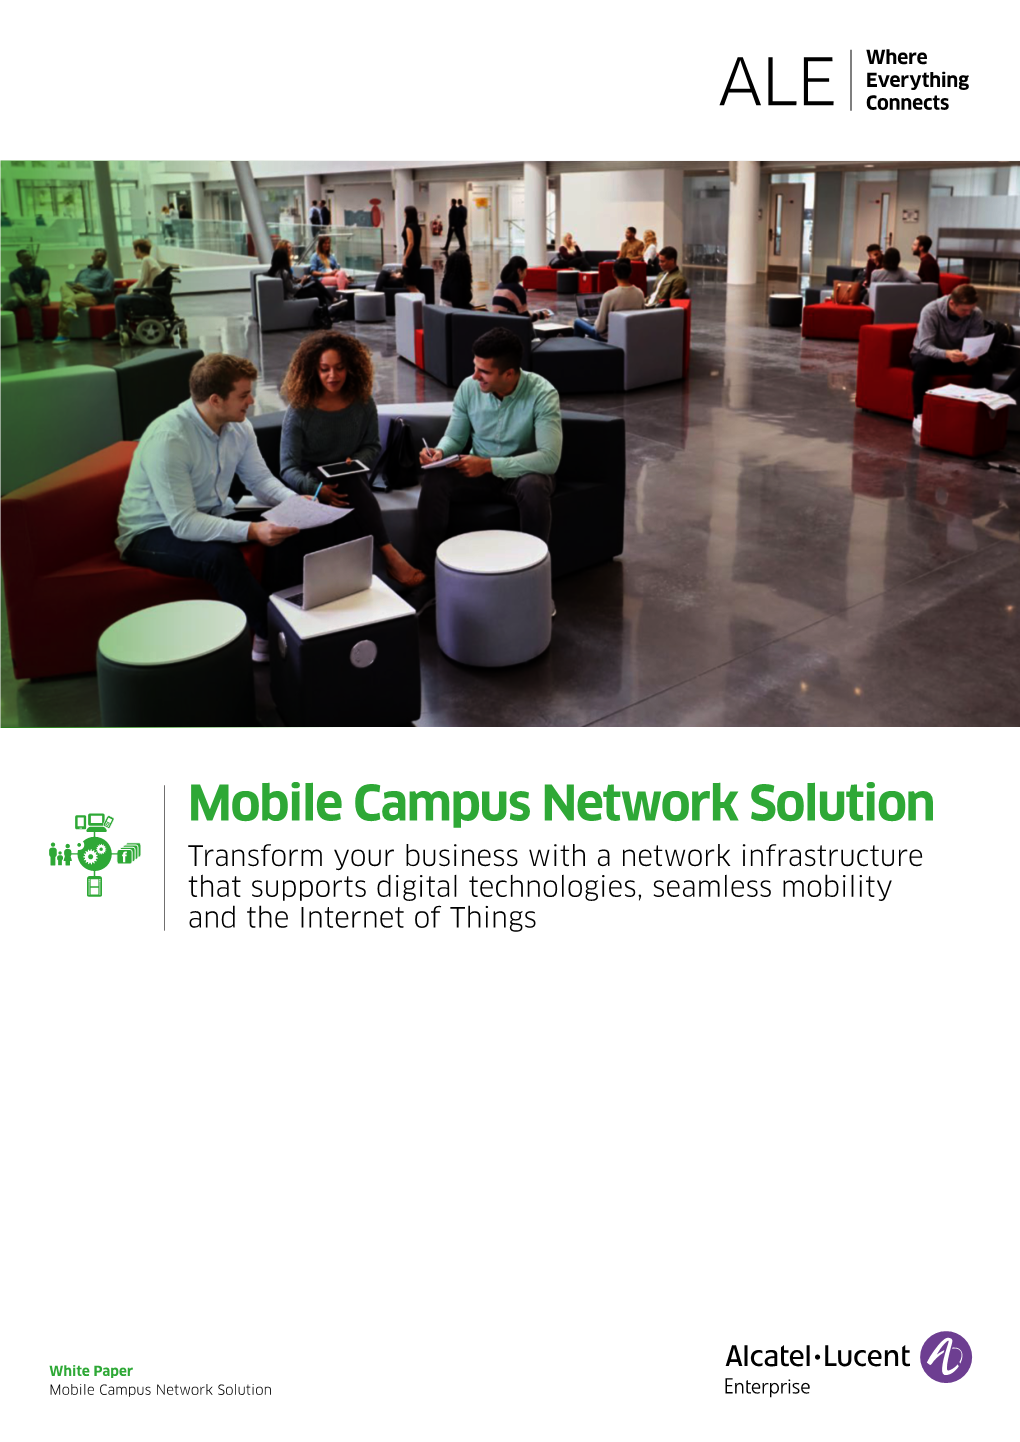 Mobile Campus Network Solution Transform Your Business with a Network Infrastructure That Supports Digital Technologies, Seamless Mobility and the Internet of Things